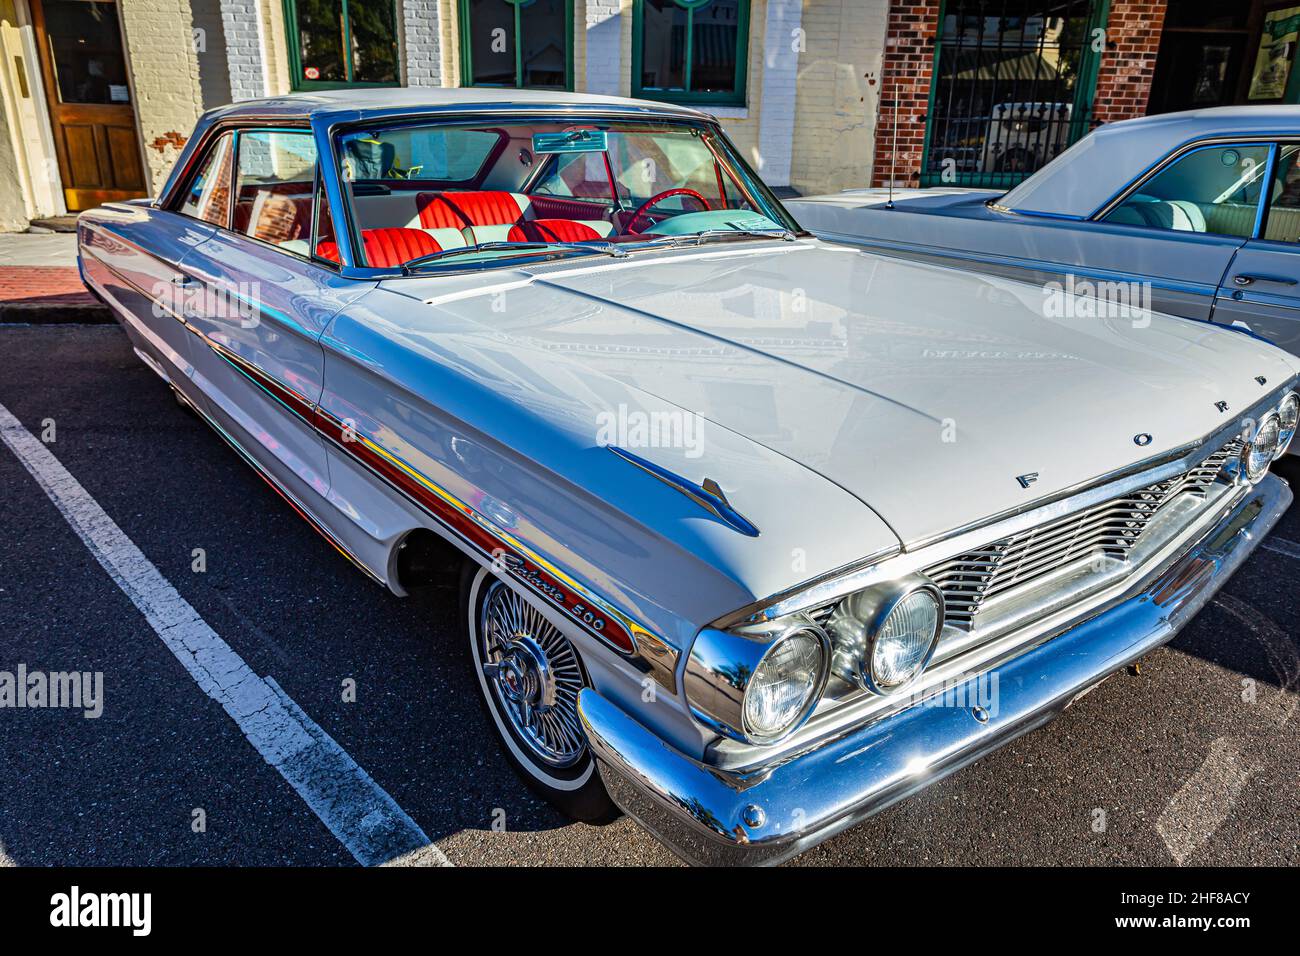 Fernandina Beach, FL - October 18, 2014: Wide angle front corner view of a 1964 Ford Galaxie 500 hardtop coupe at a classic car show in Fernandina Bea Stock Photo